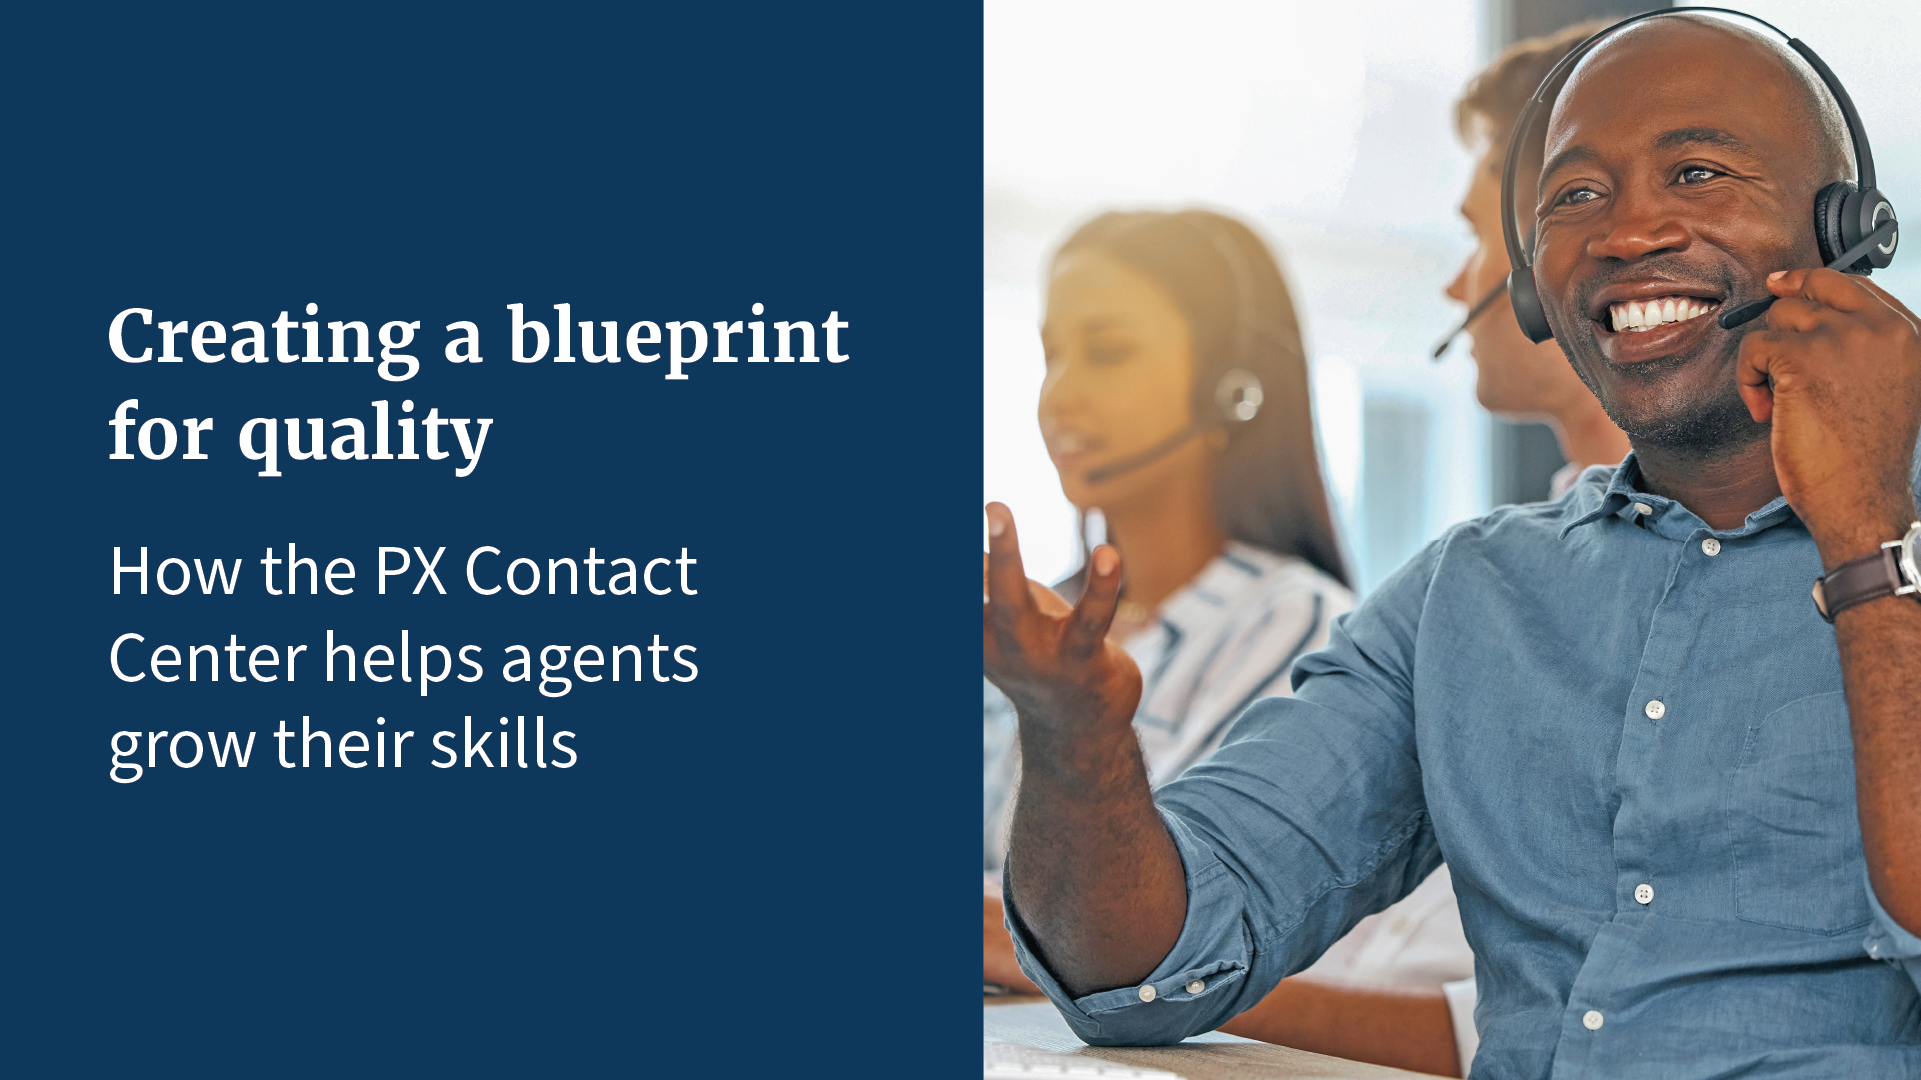 Creating a blueprint for quality: how the PX Contact Center helps agents grow their skills